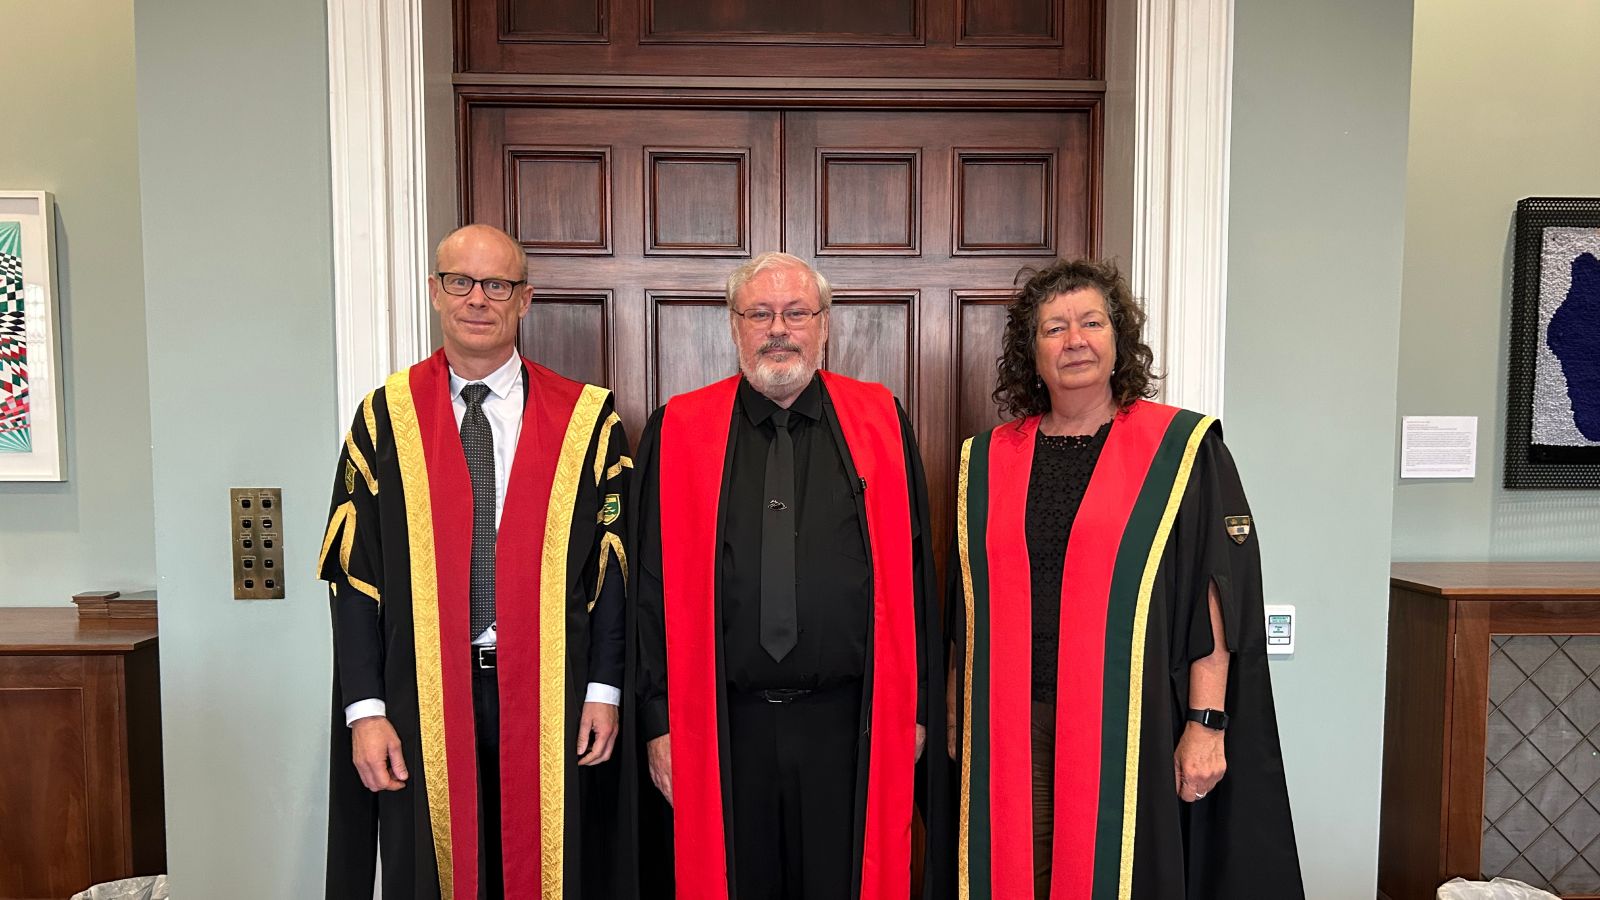 Nic Smith, Stephen Marshall and Wendy Larner standing together in academic dress